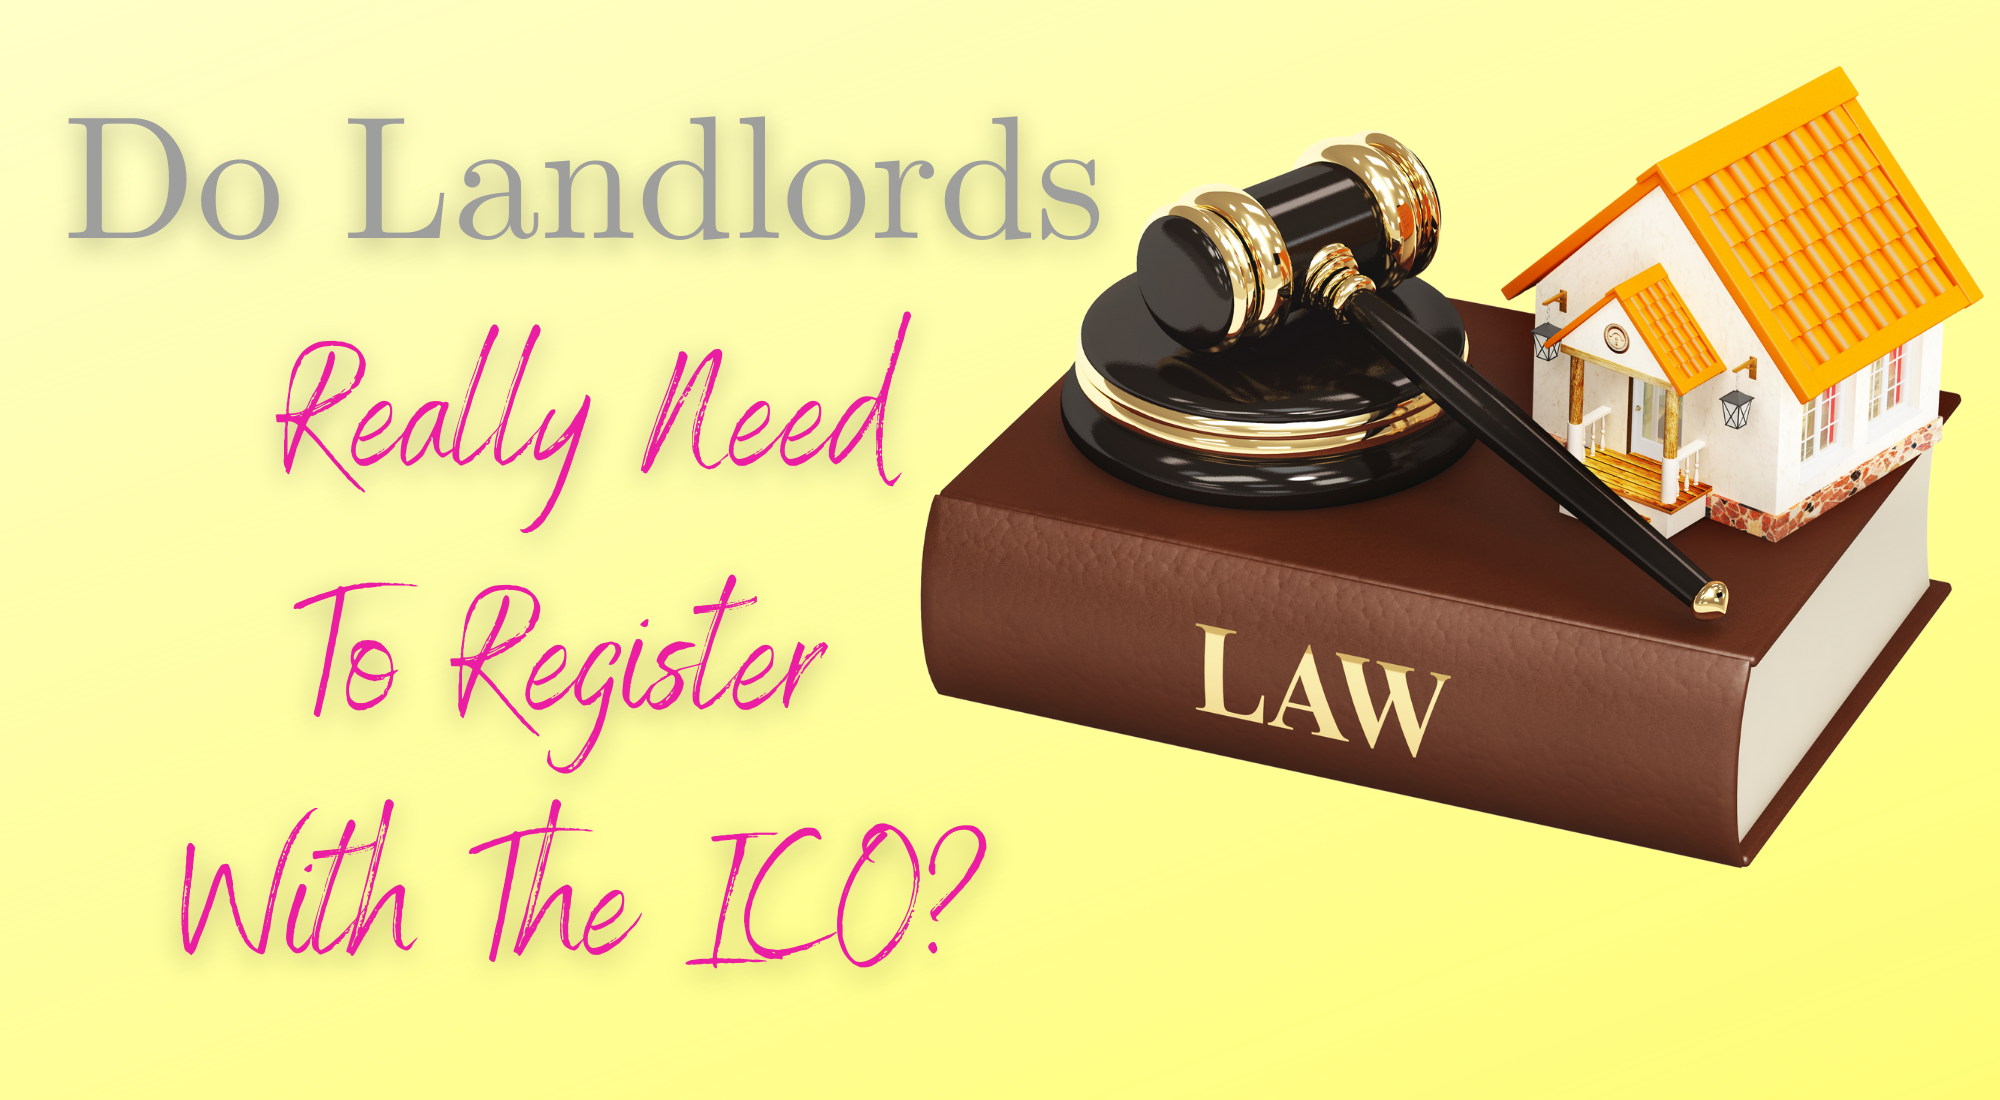 Do Landlords Really Need To Register With The ICO?